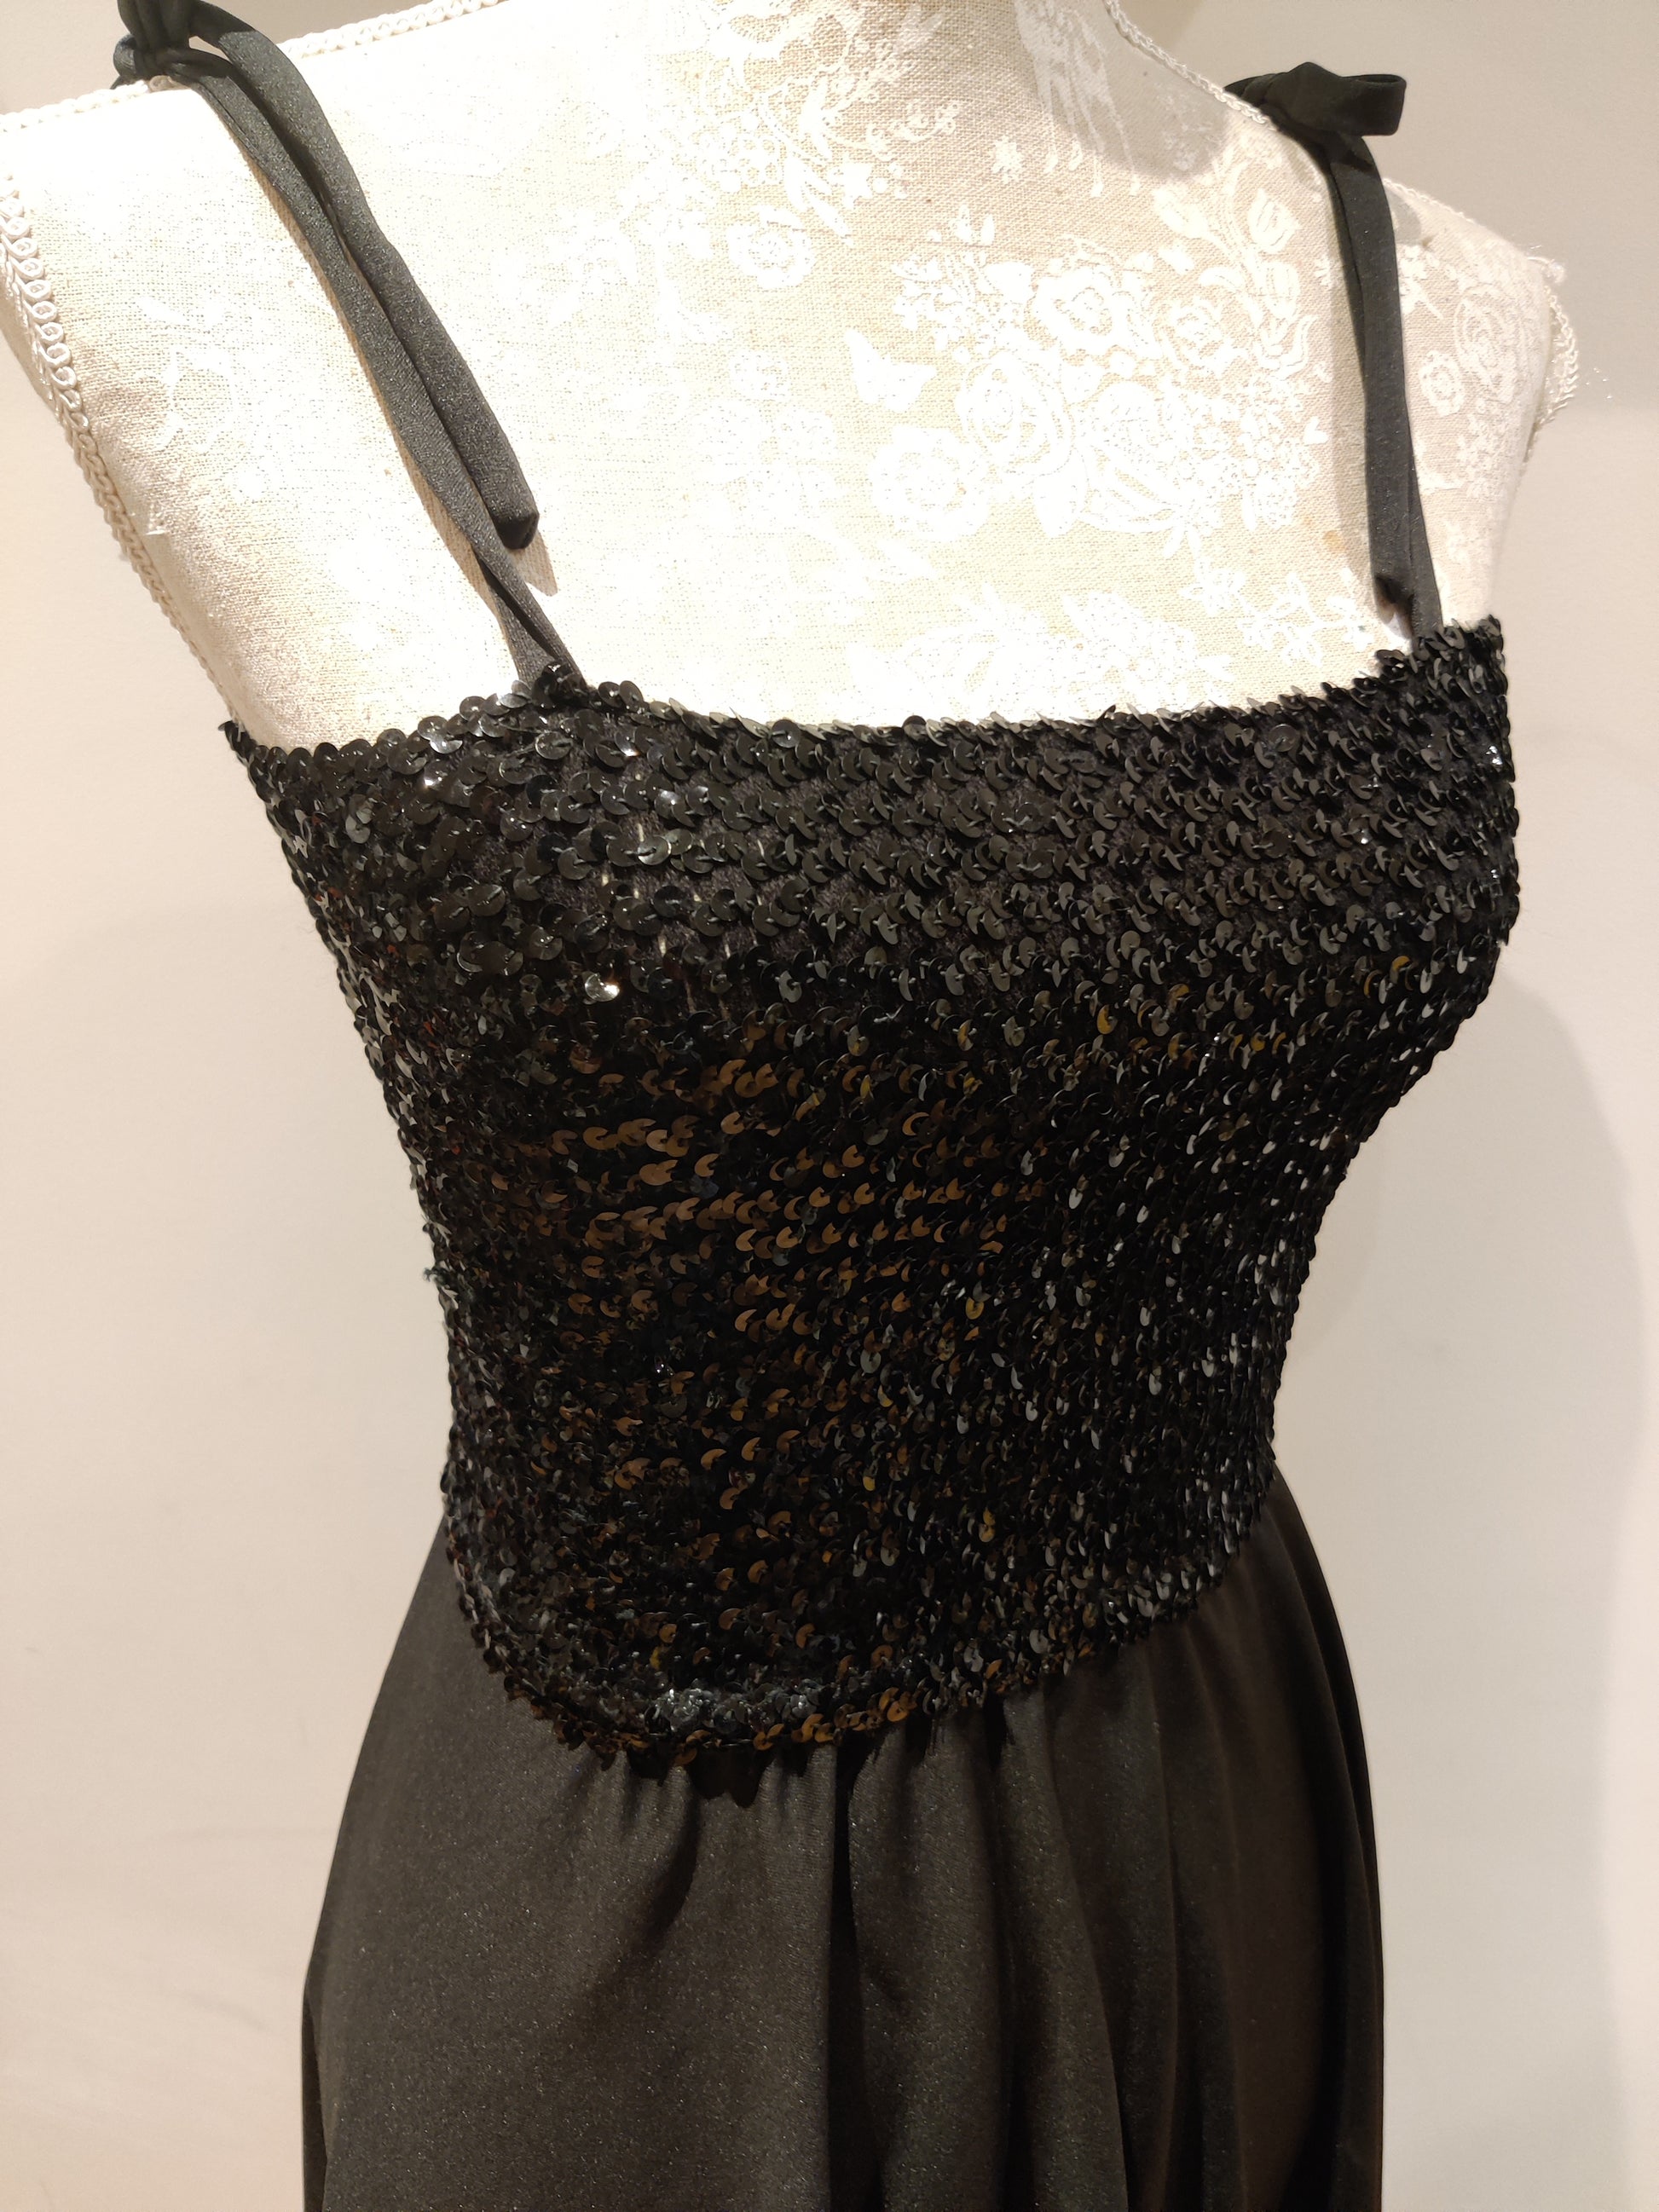 70s boob tube dress with sequins